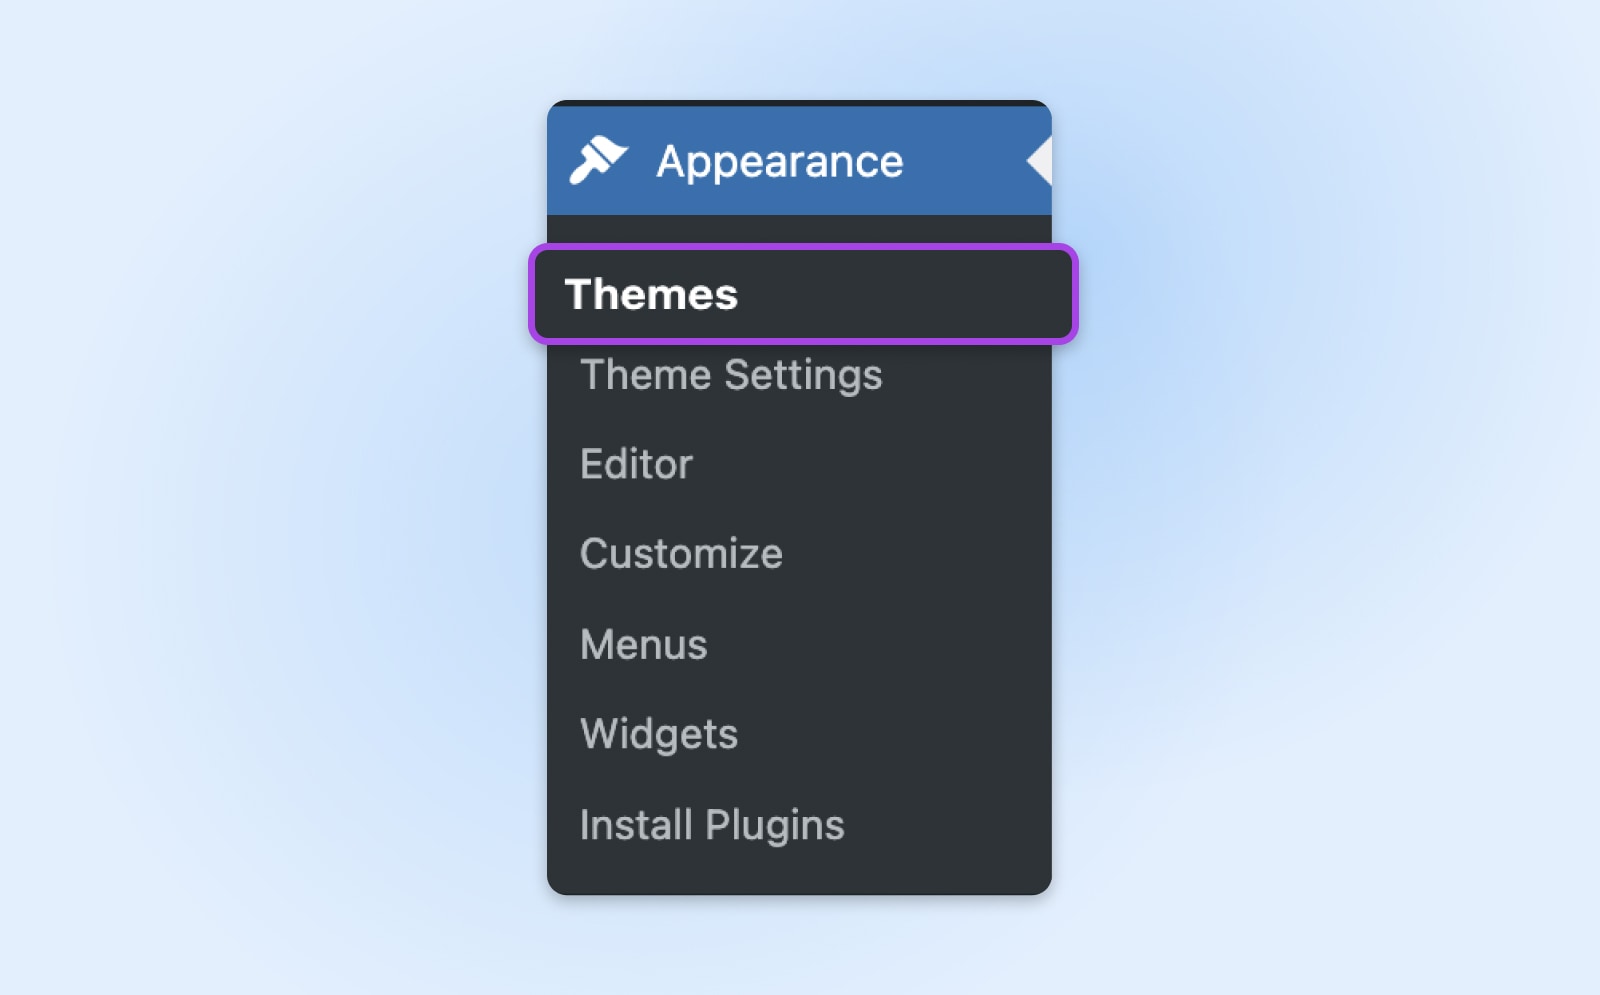 'Appearance' tab selected and 'Themes' chosen from the drop-down menu with options also for menus and widgets.